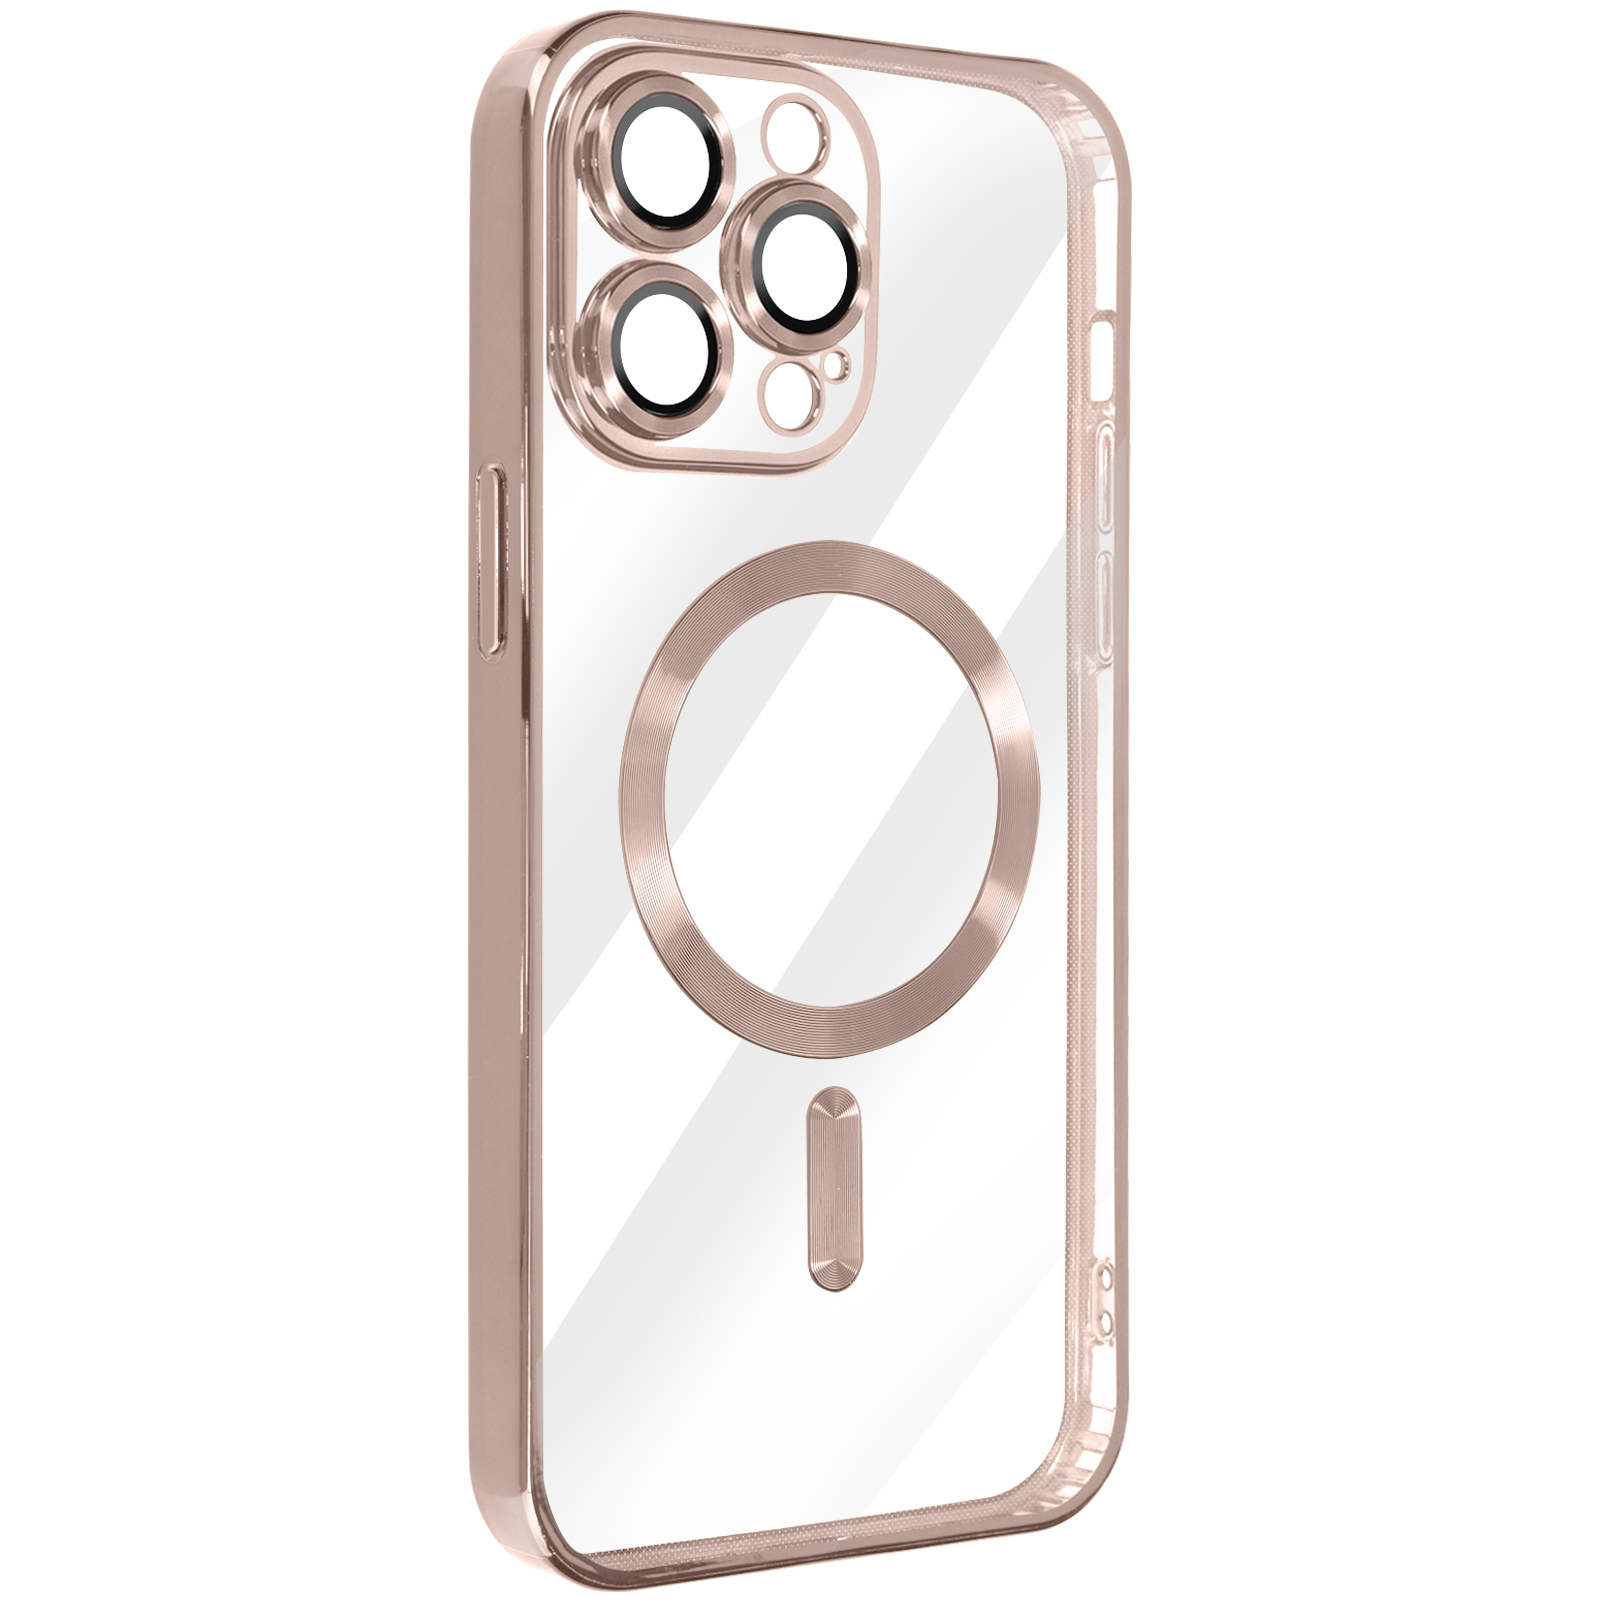 Pro 14 Apple, Chrom Series, Backcover, AVIZAR Handyhülle Max, iPhone Rosegold